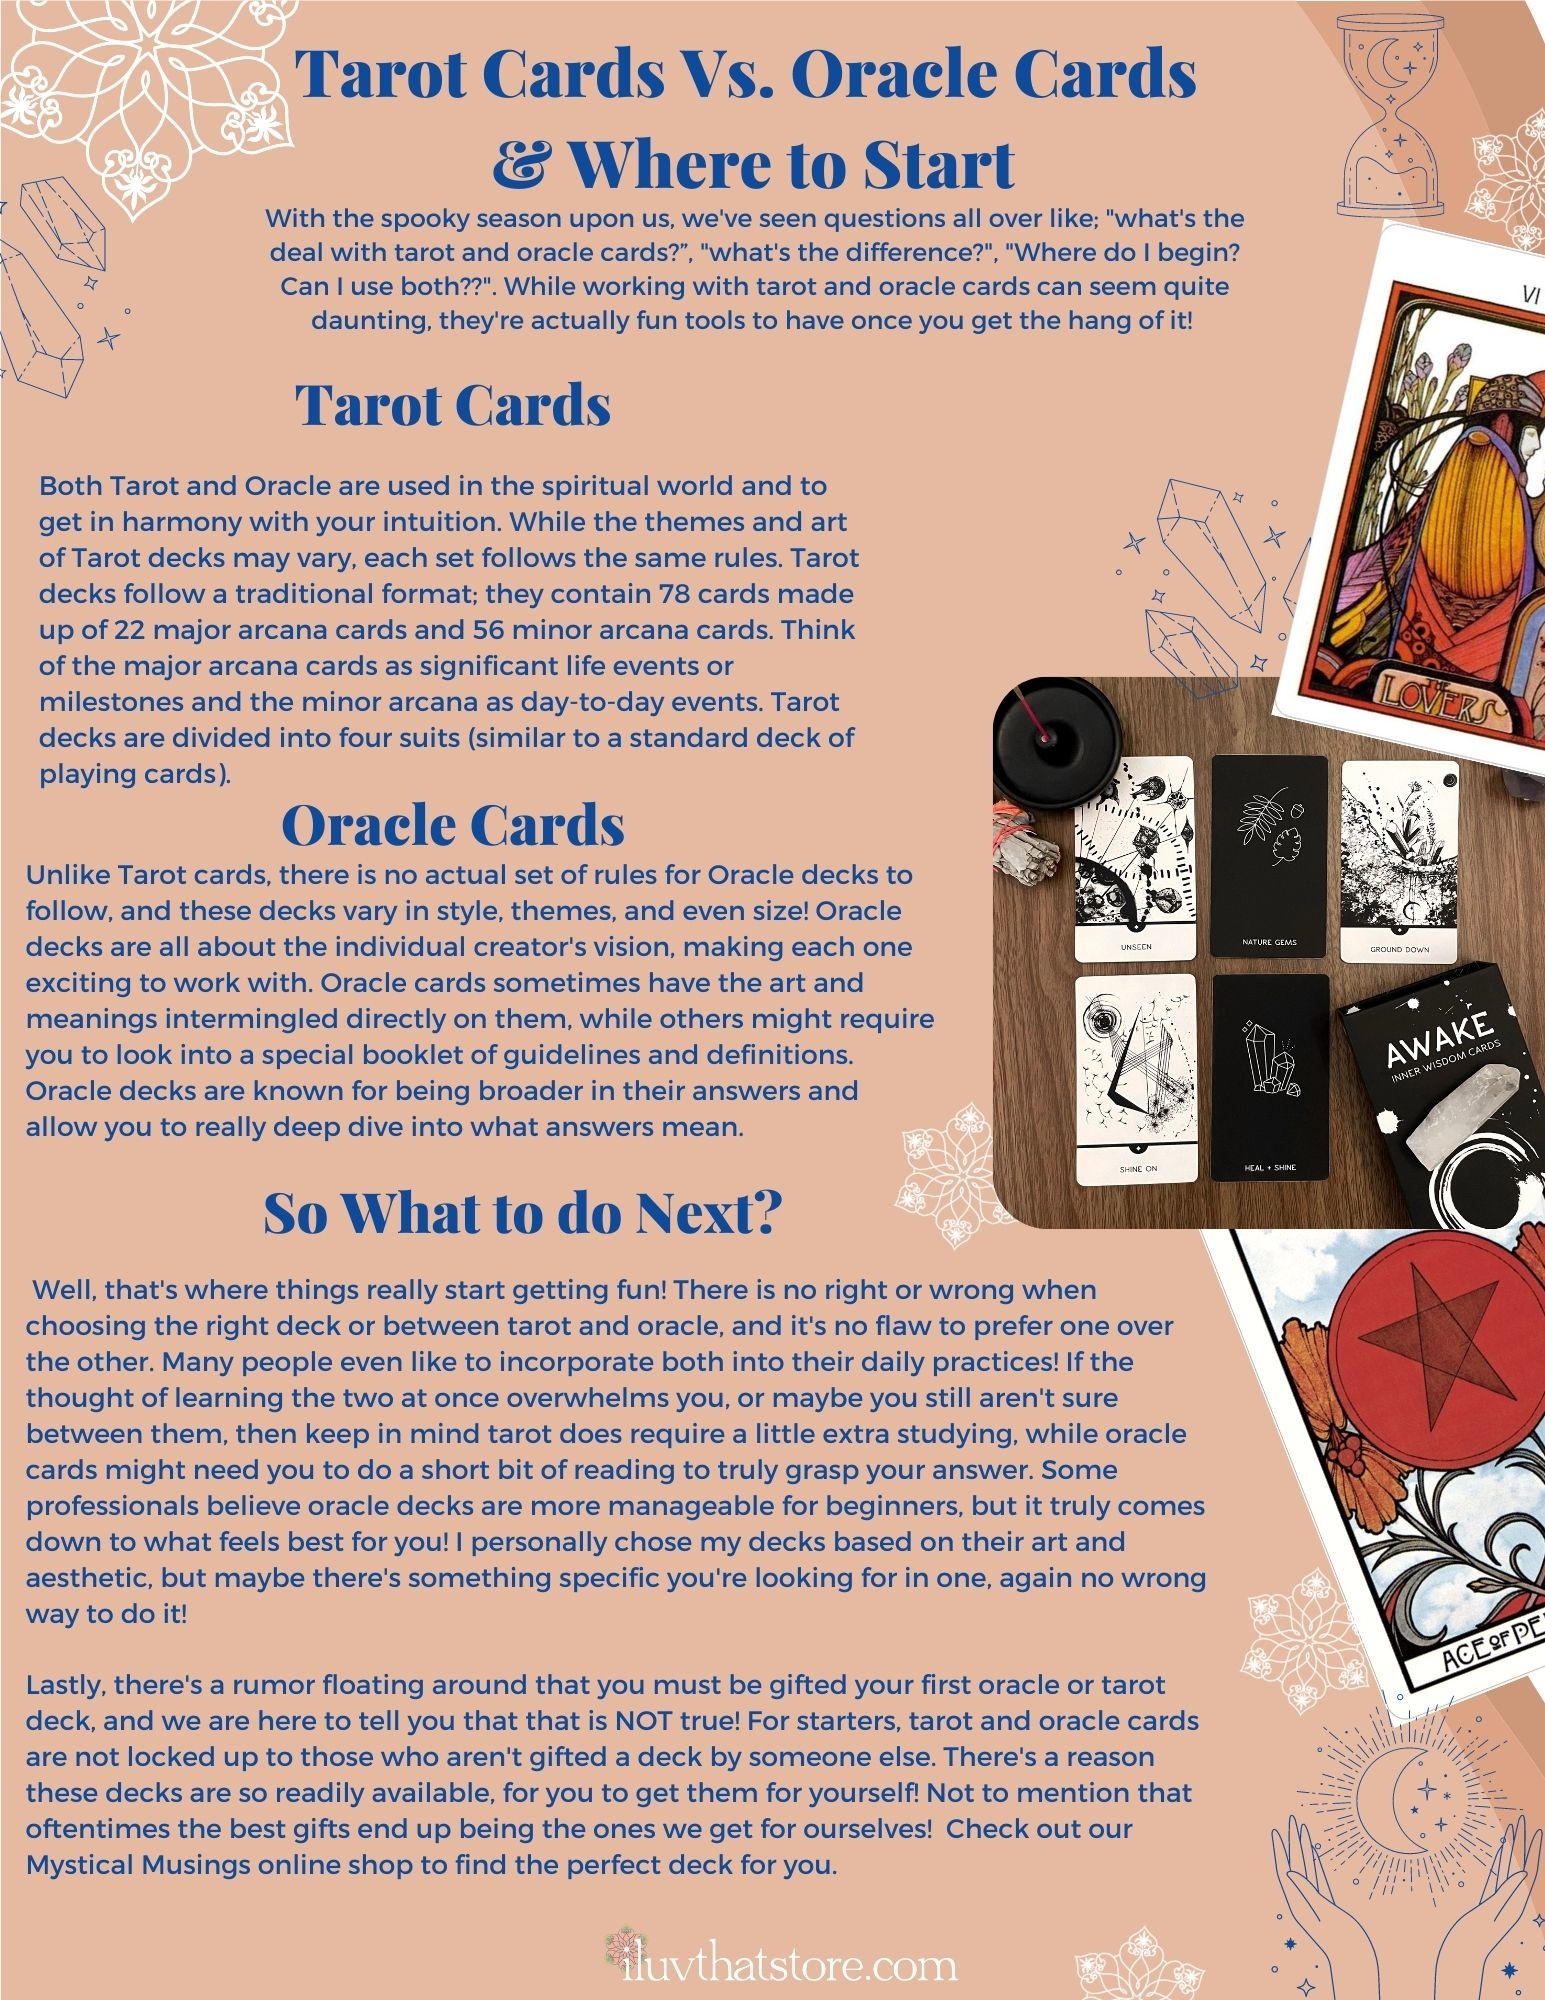 Oracle Cards vs Tarot Cards: What’s the Difference?